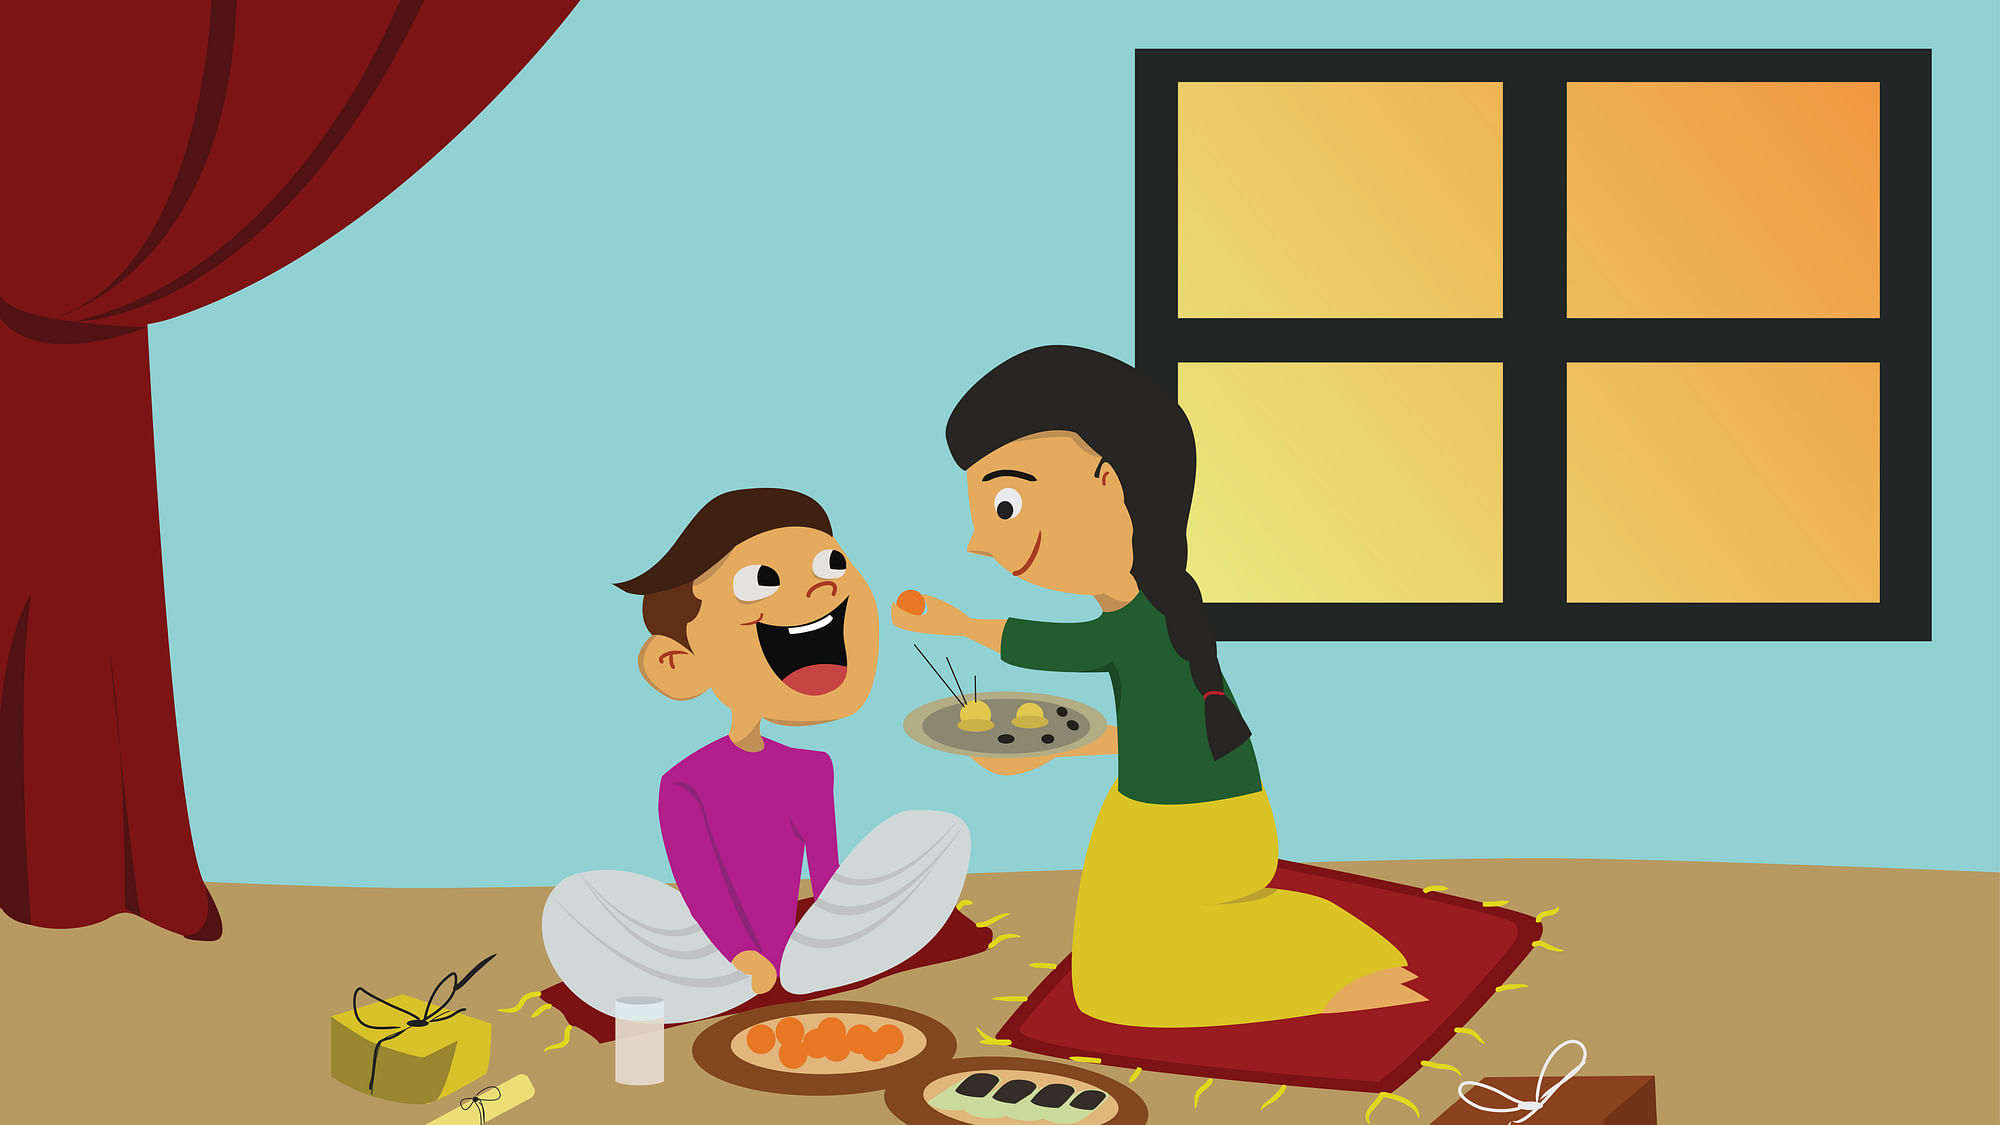 Happy Bhai Dooj Wishes for Brother &amp; Sister: Bhai Dooj celebrates the beautiful bond that the brothers and sisters share.